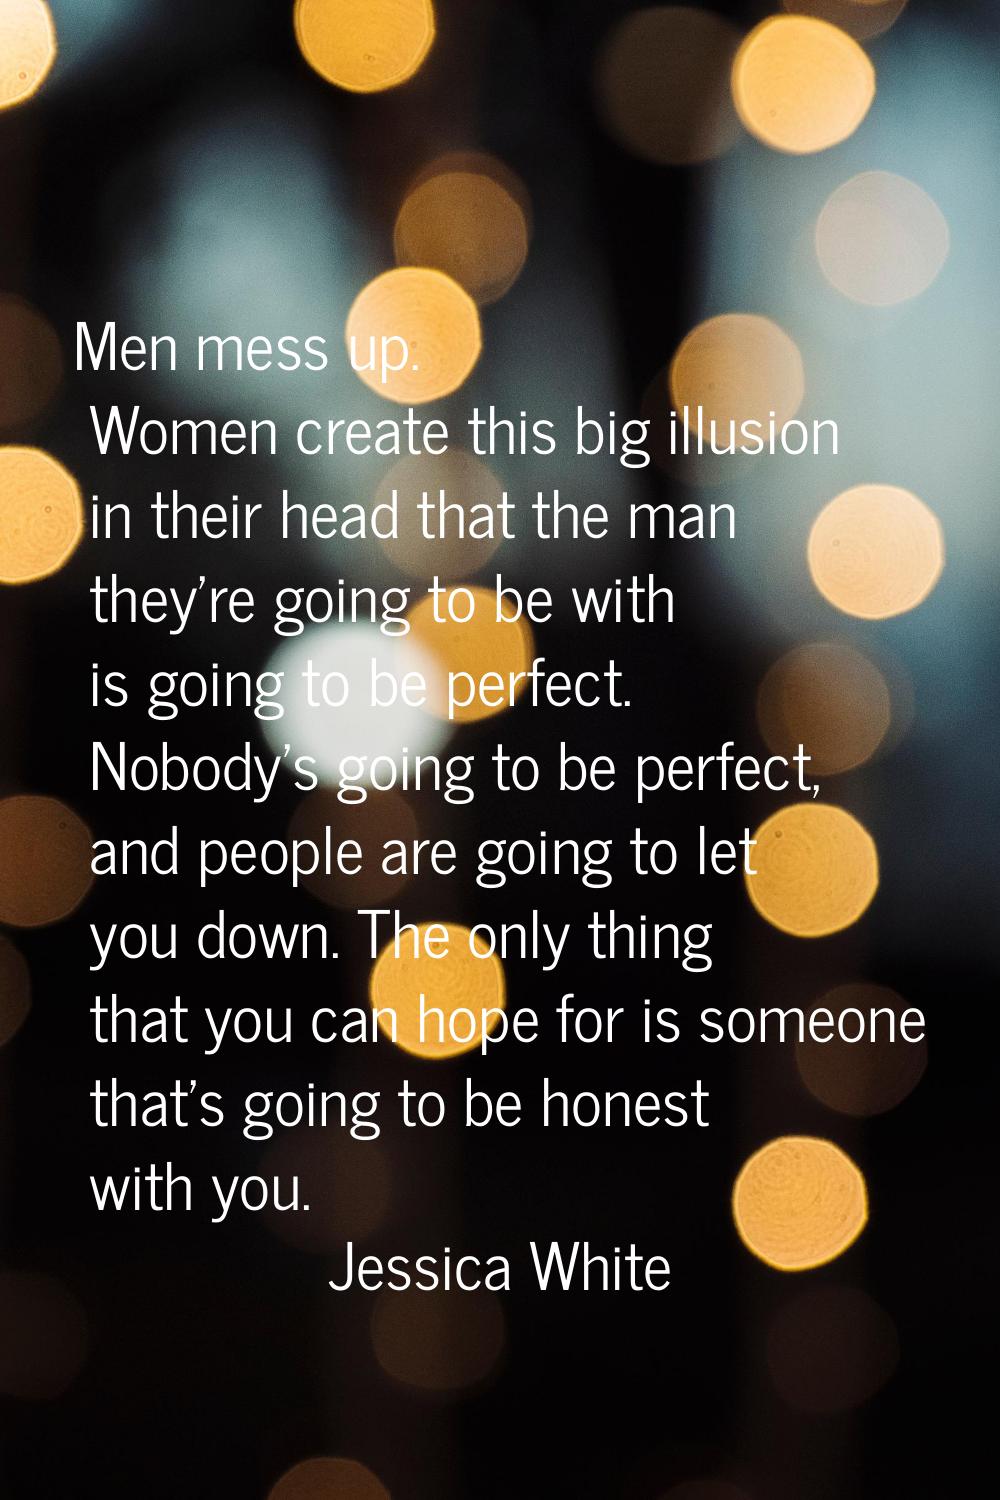 Men mess up. Women create this big illusion in their head that the man they're going to be with is 